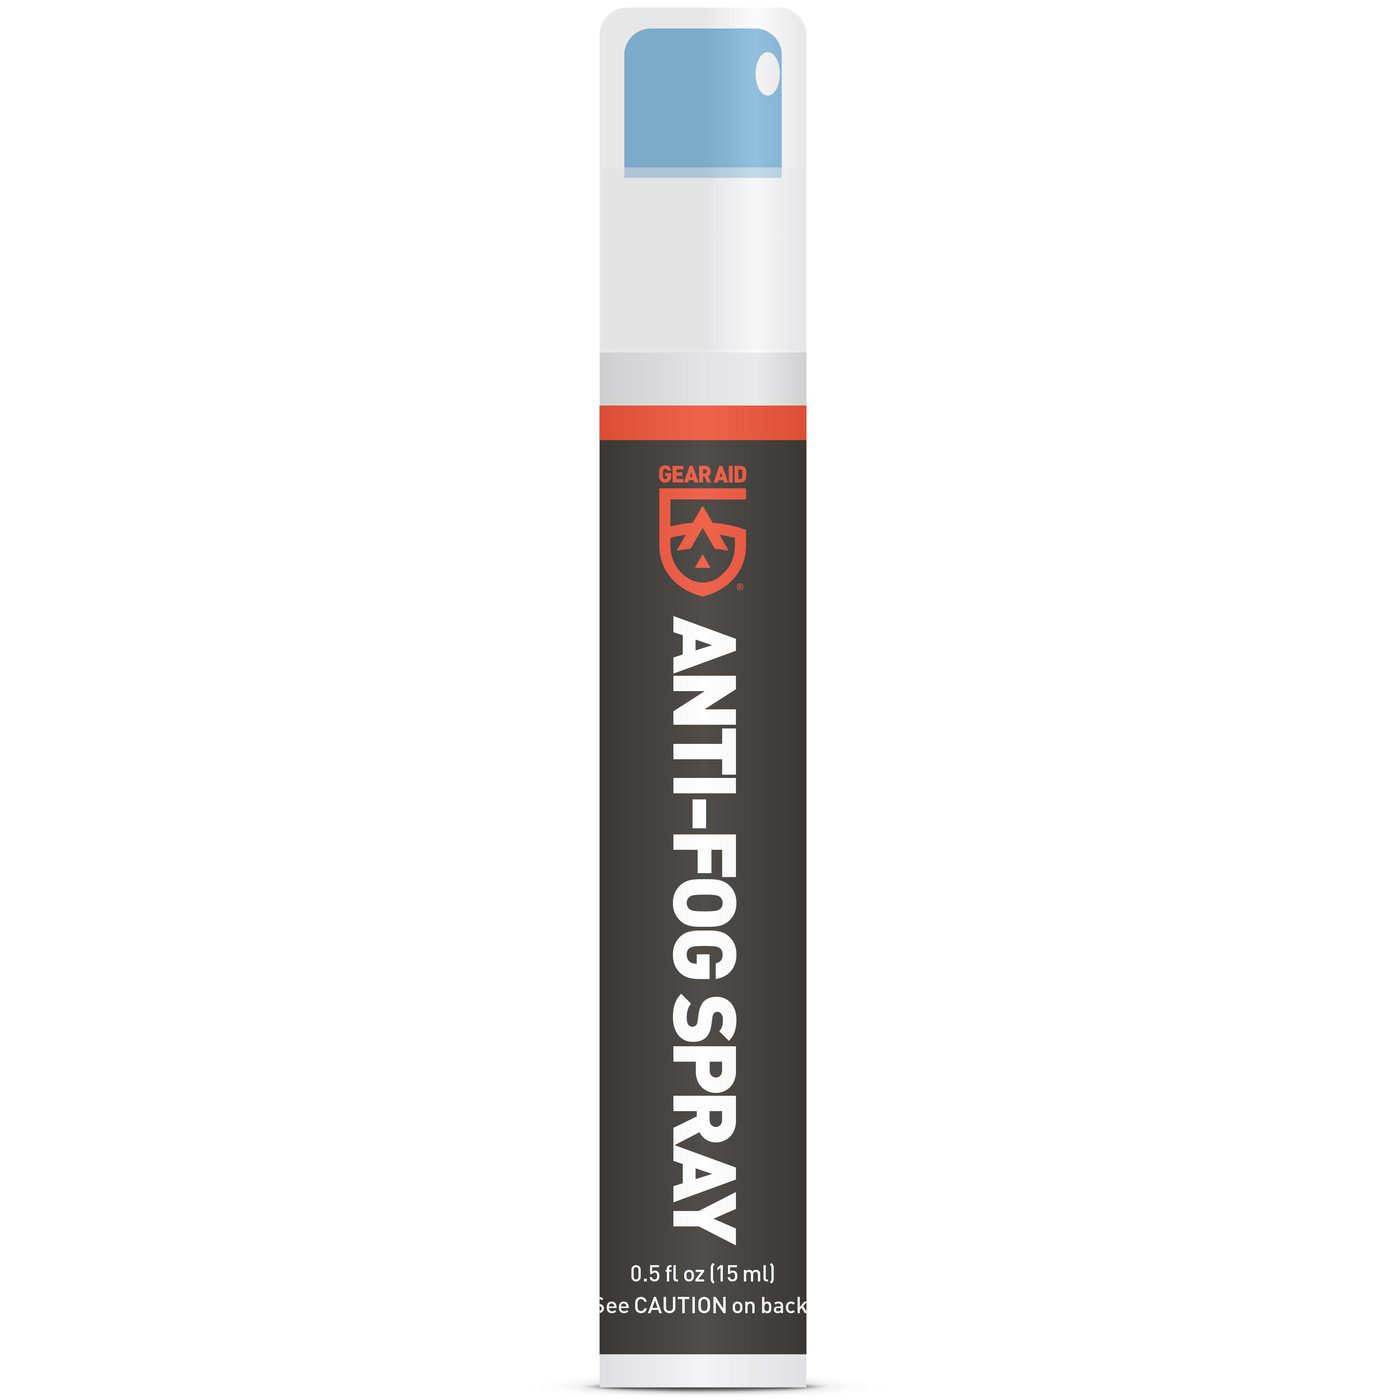 Gear Aid Revivex UV Protectant